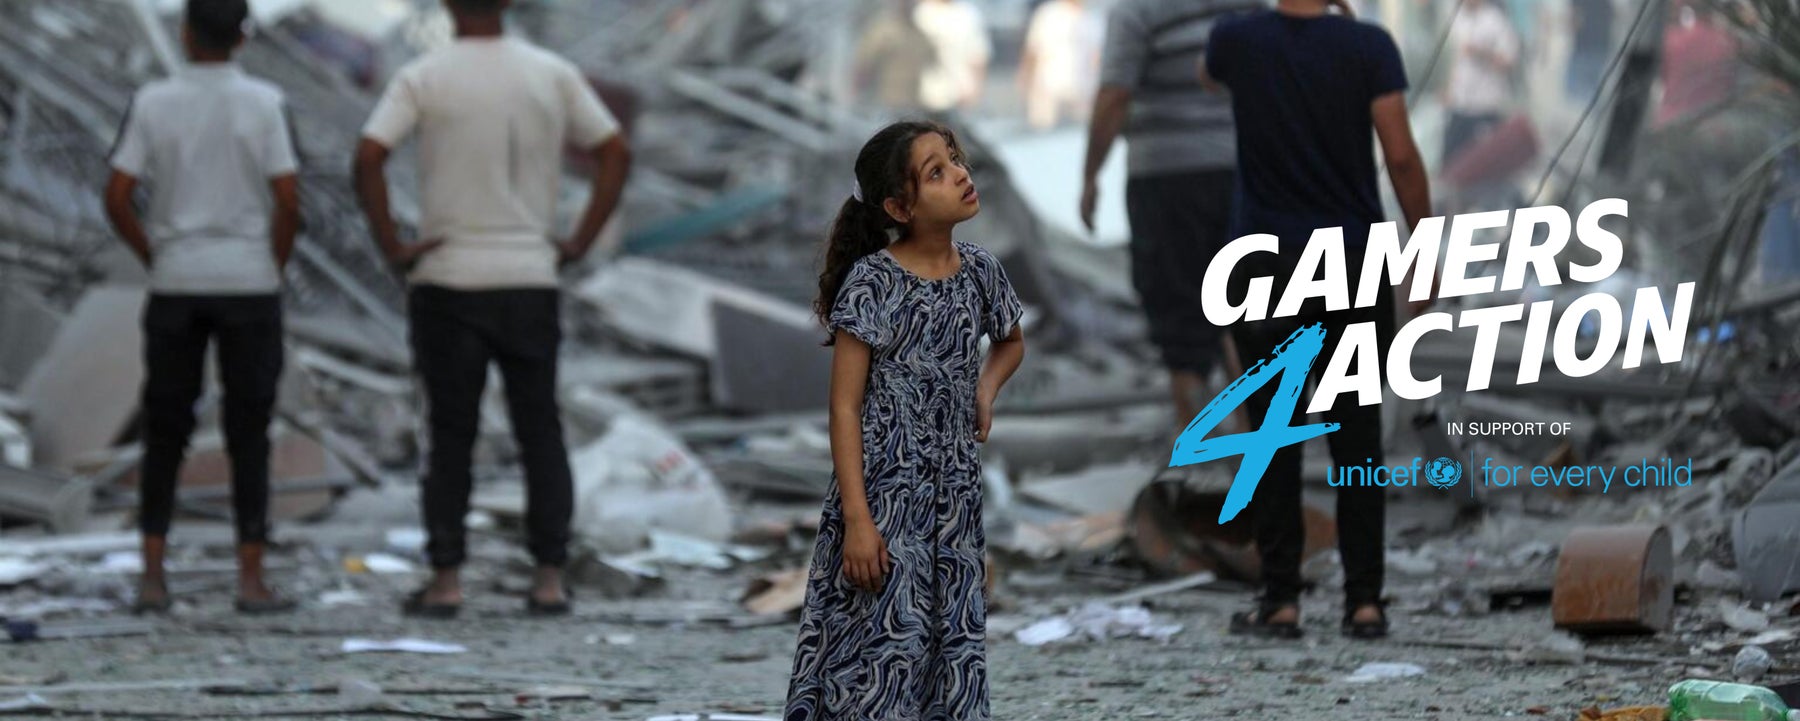 A young girl looking up and standing on the damaged streets of Gaza.